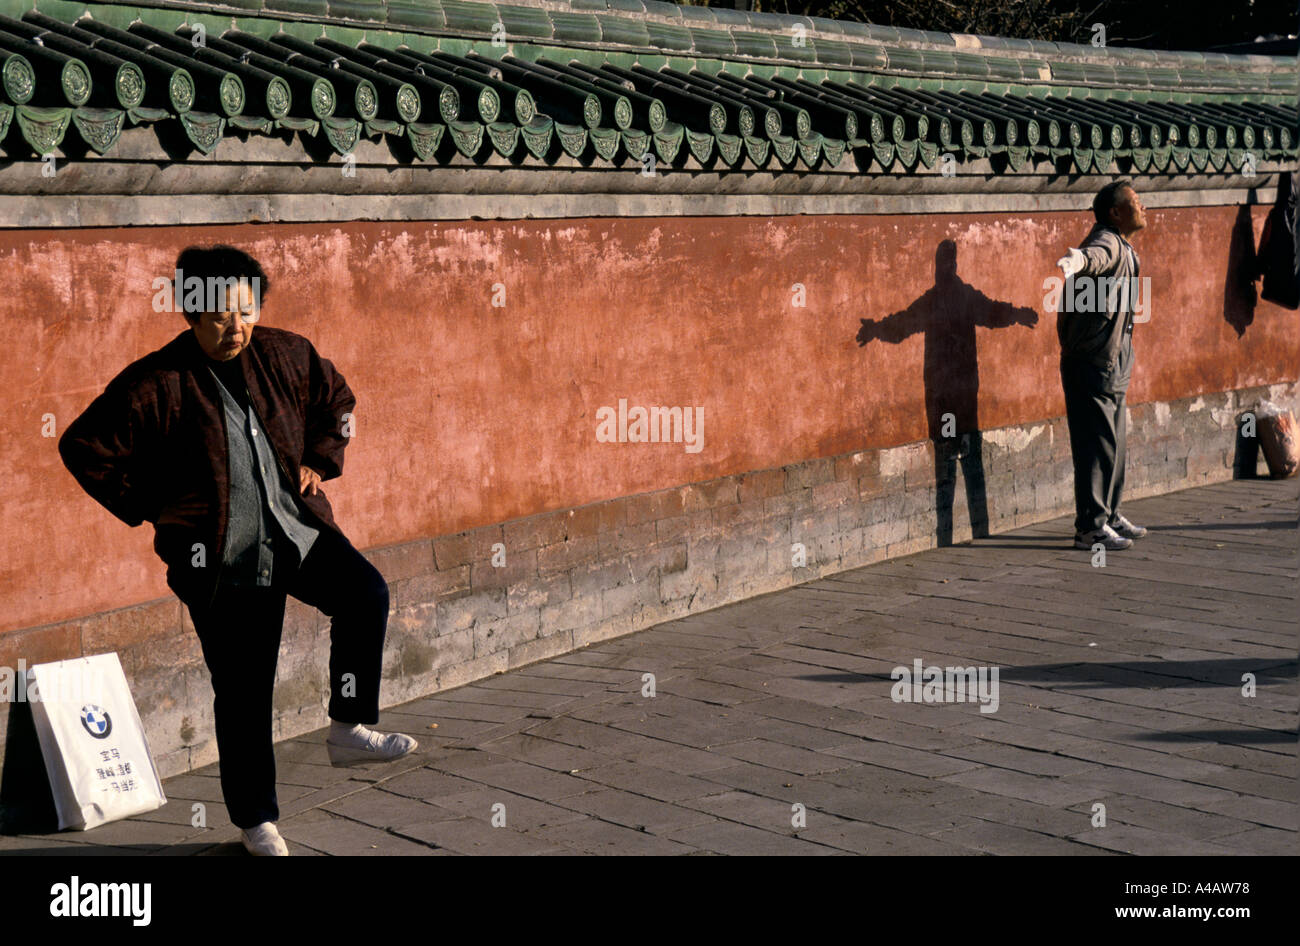 Beijing, China 1997:  A woman takes part in a Tai Chi class in the early morning at Ritan park Stock Photo